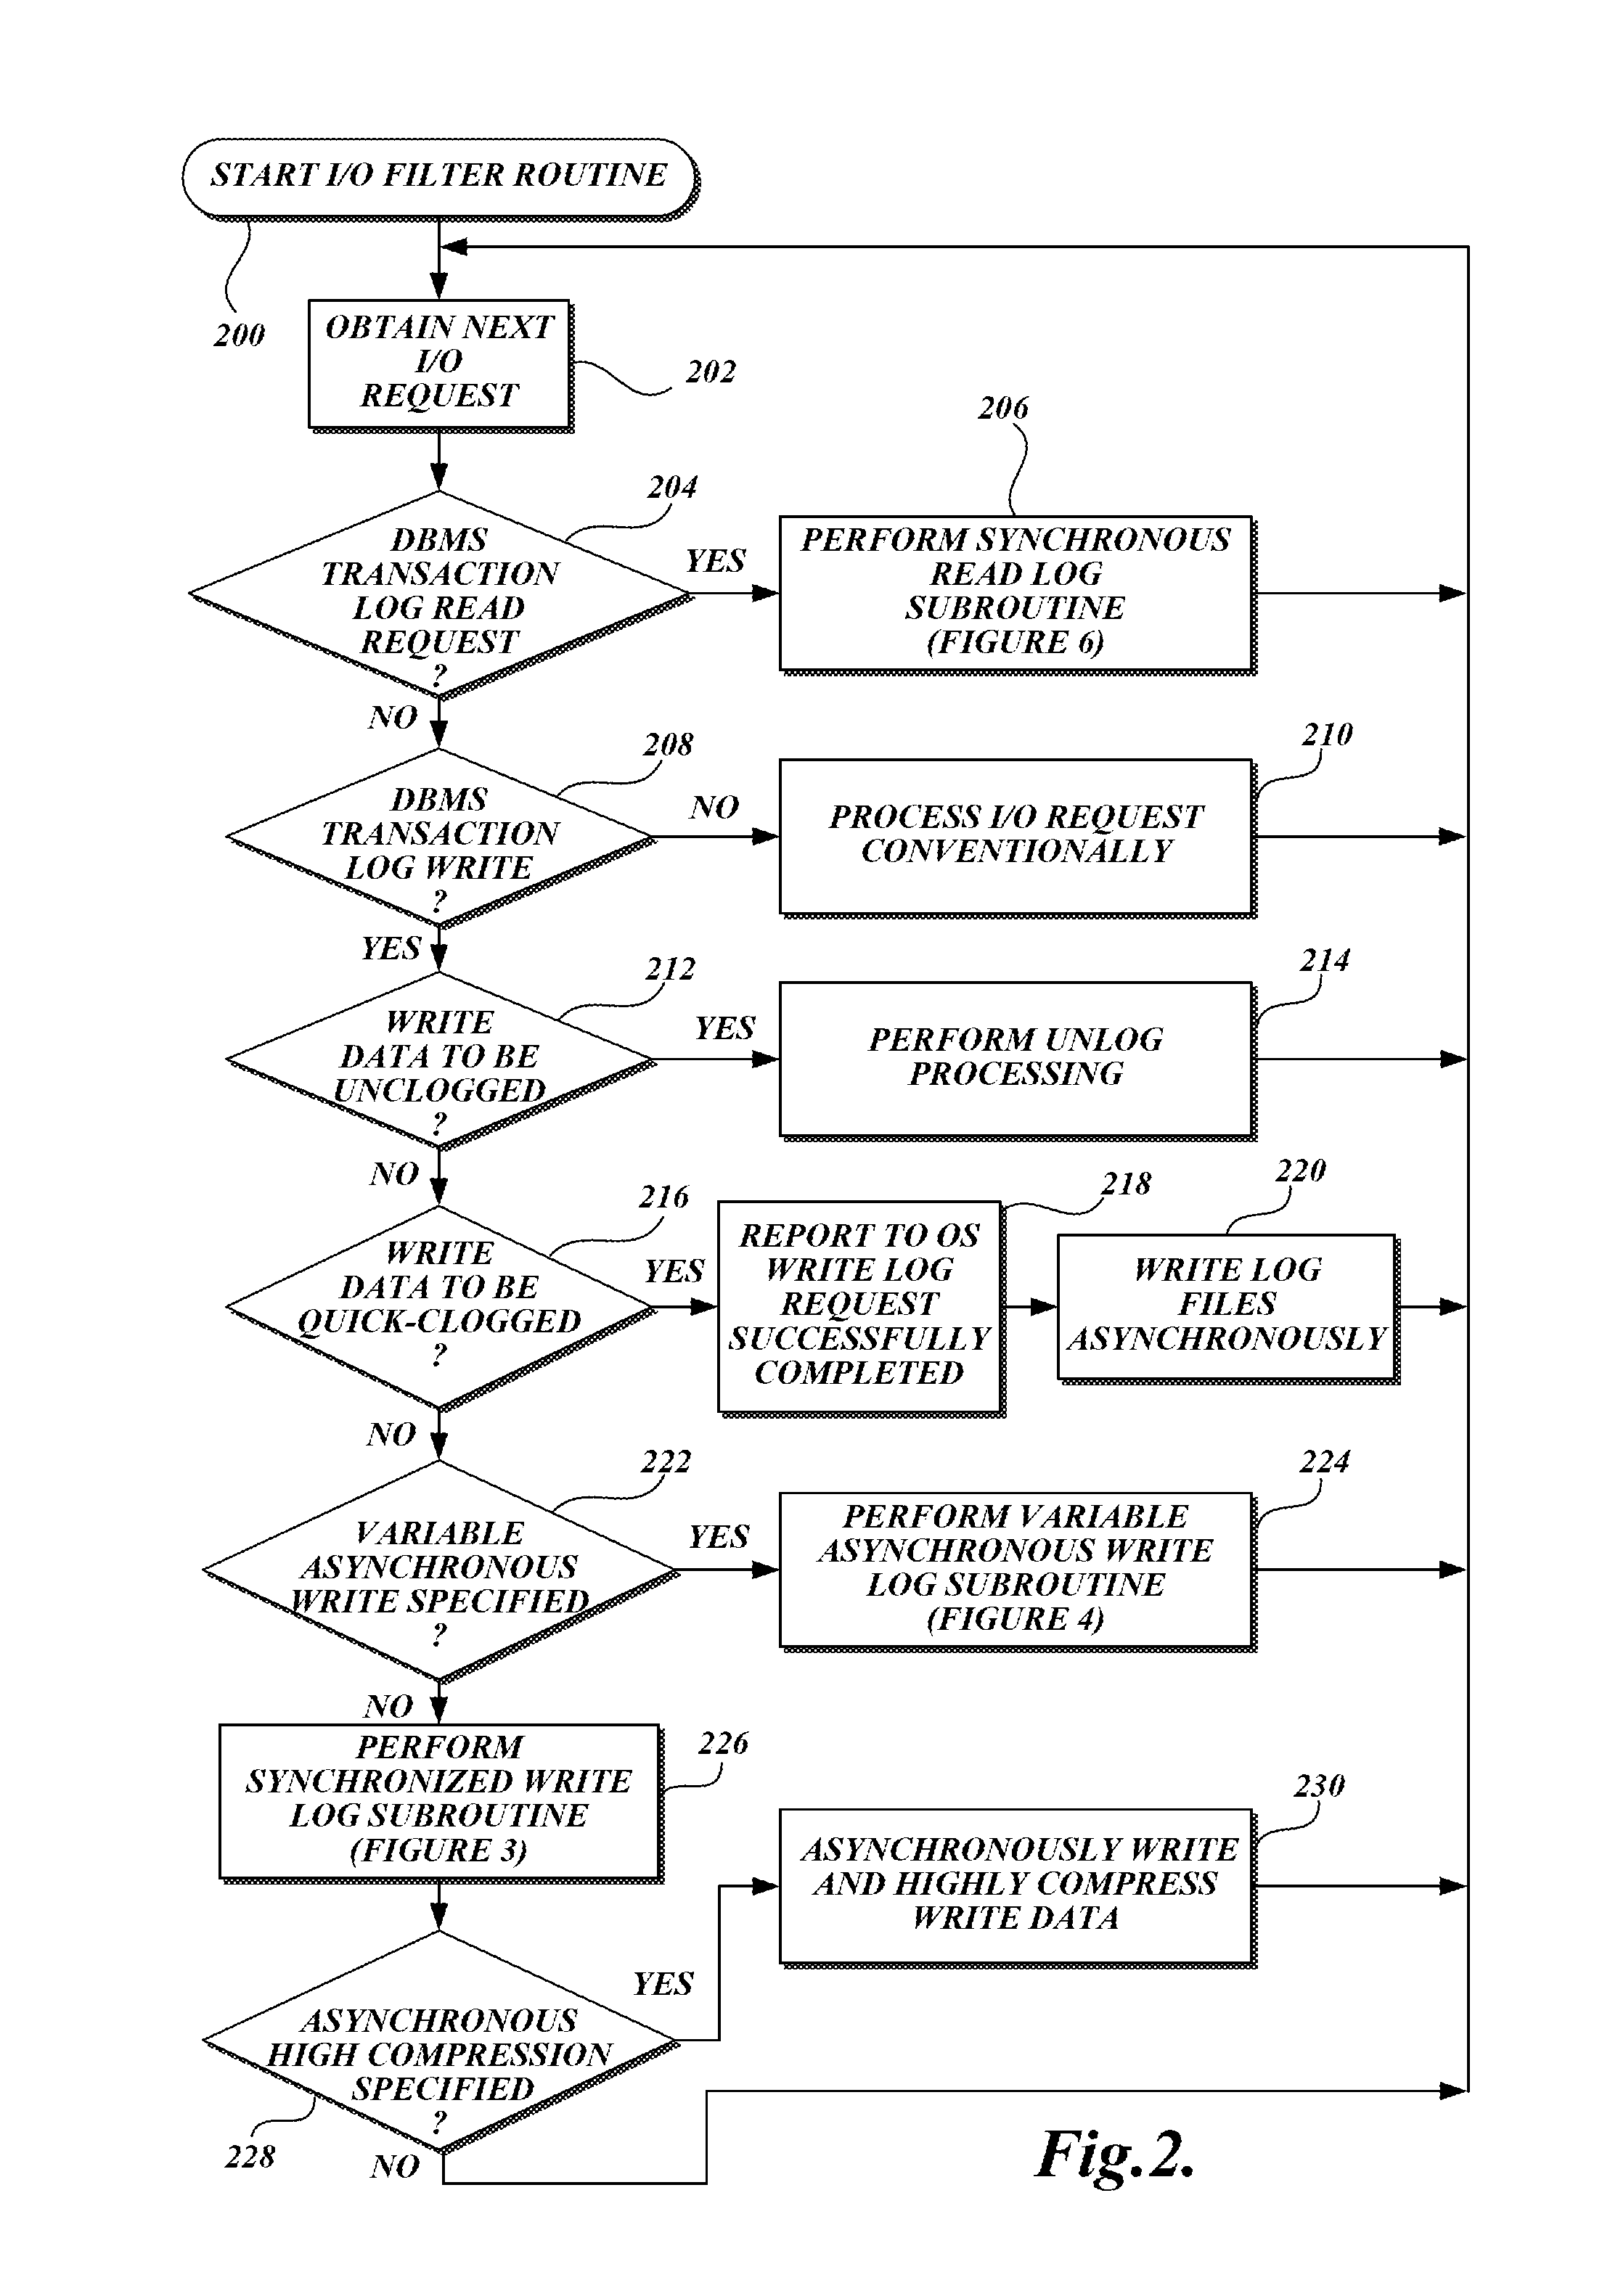 System and Method For Providing High-Availability and High-Performance Options For Transaction Log